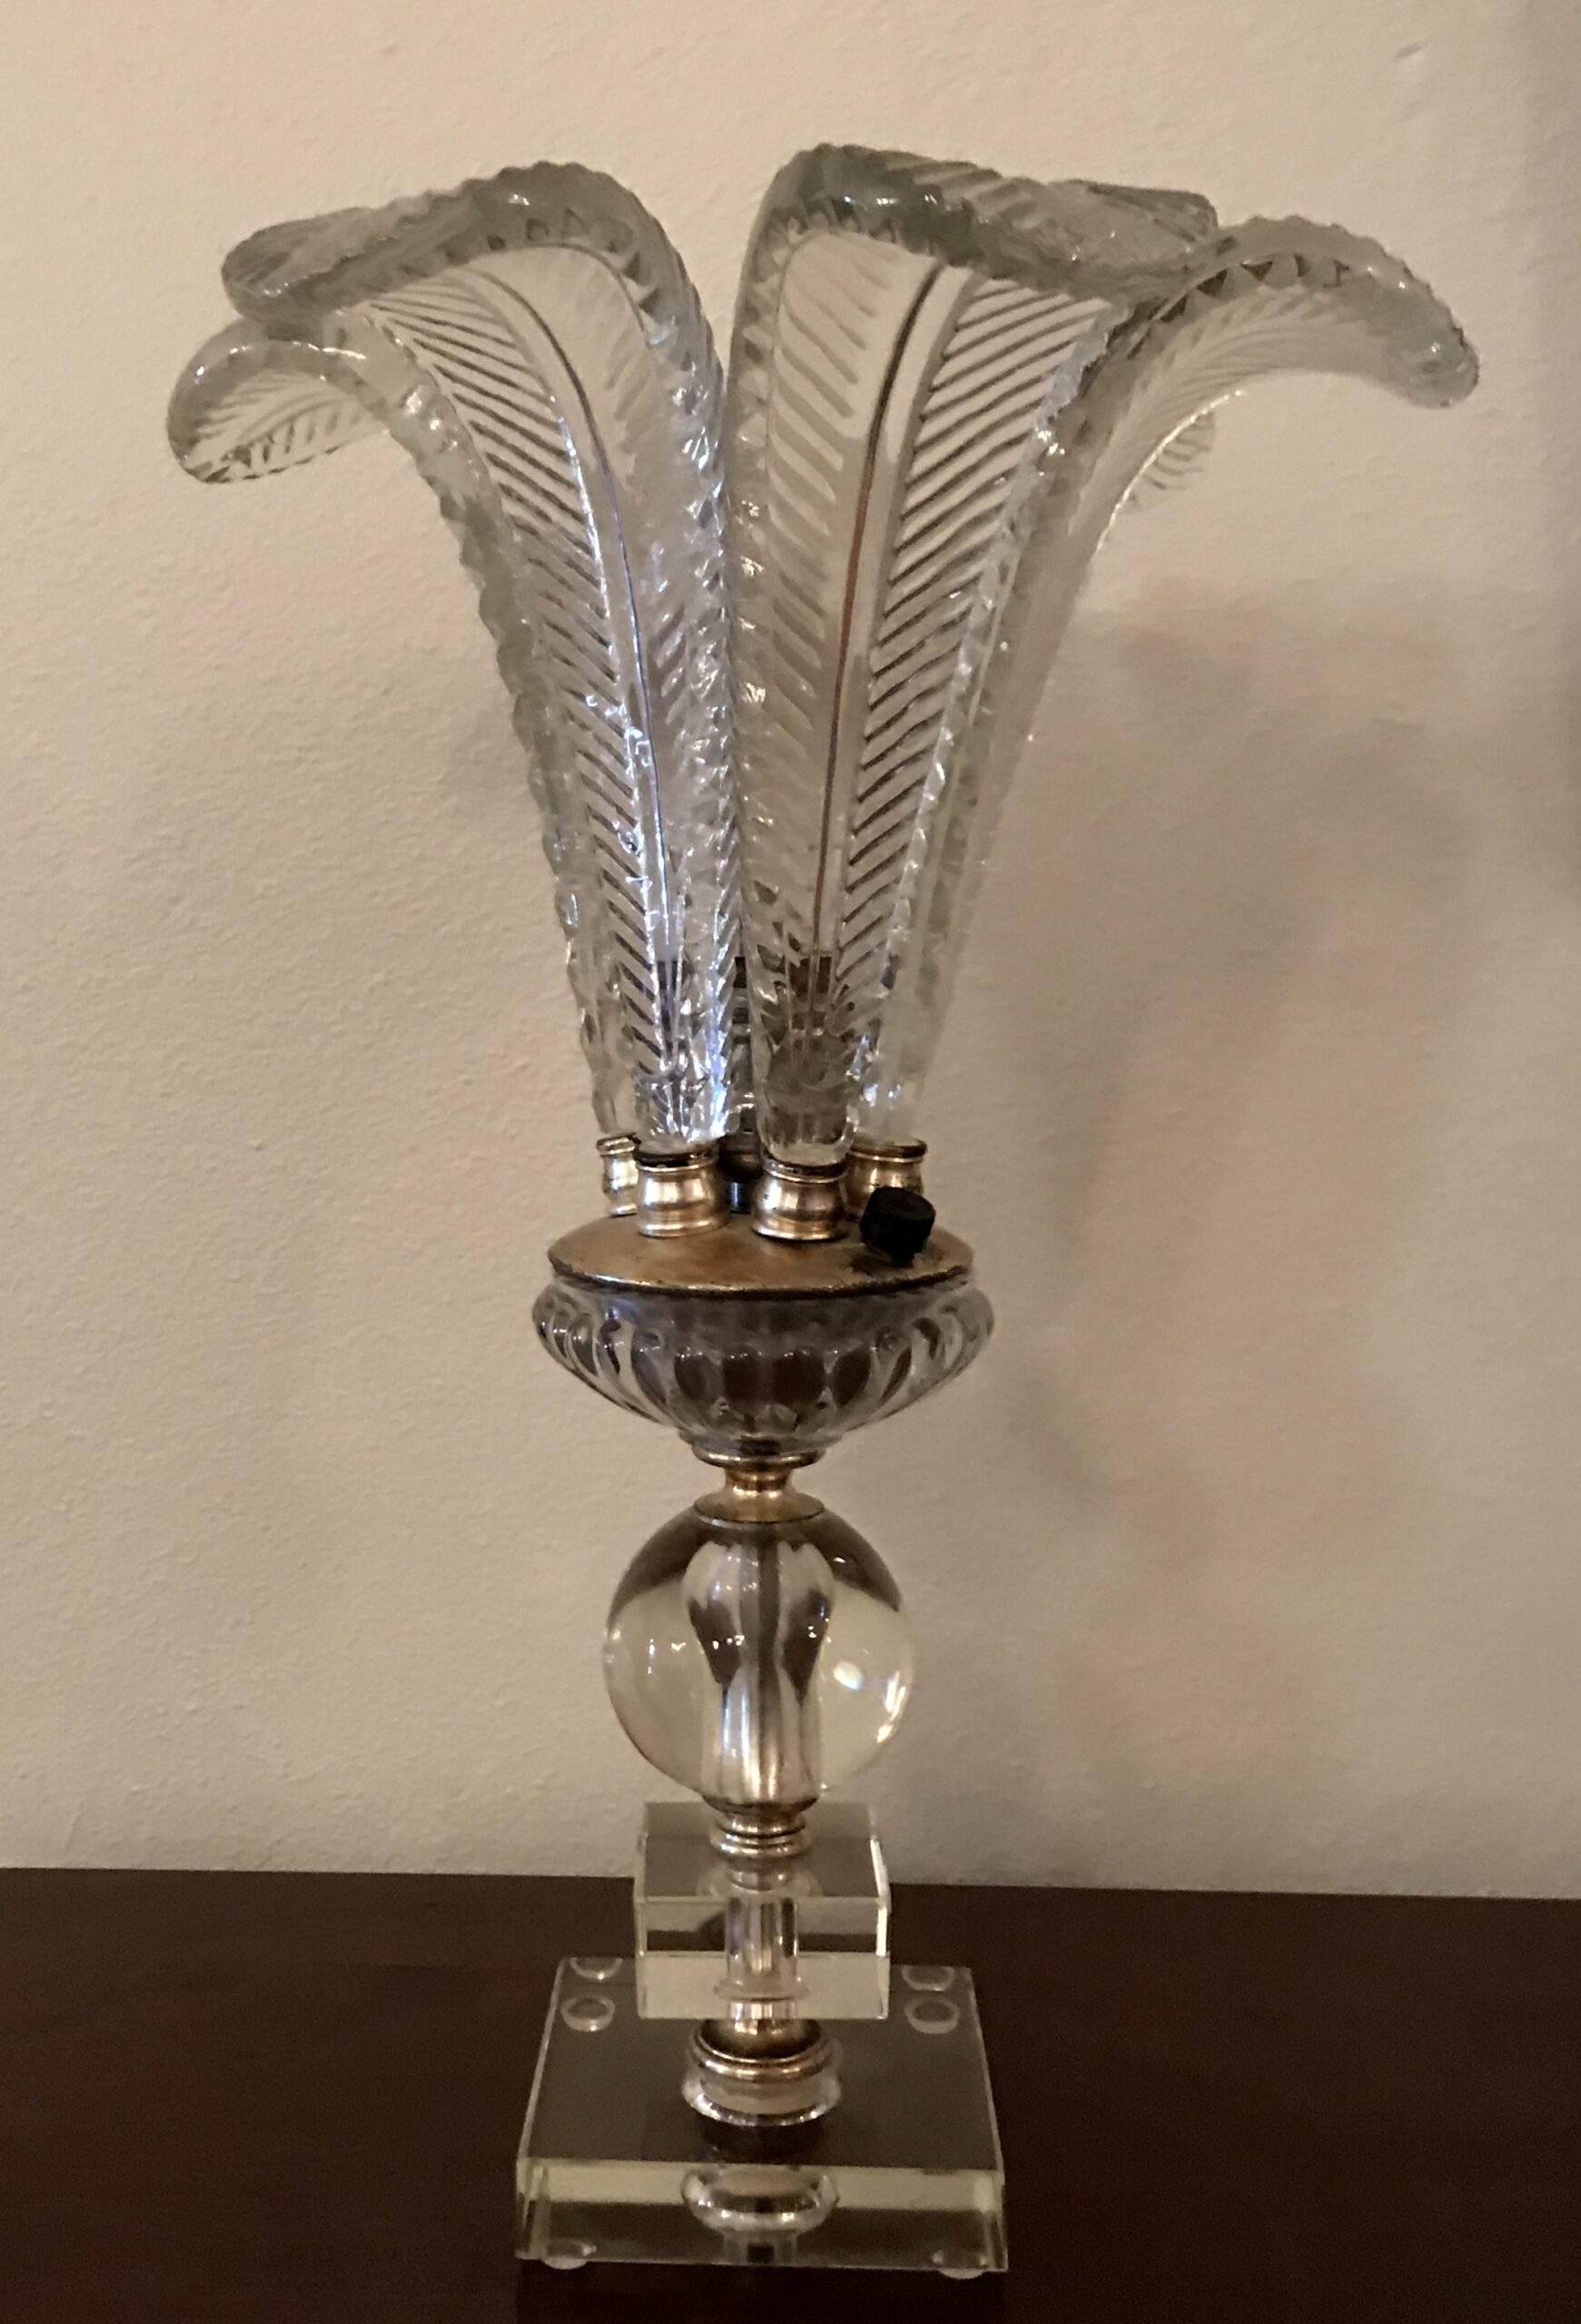 One of a Pair of Refurbished Glass Palm Leaf Table Lamps (11 1/2" Diameter 17 1/2" H)